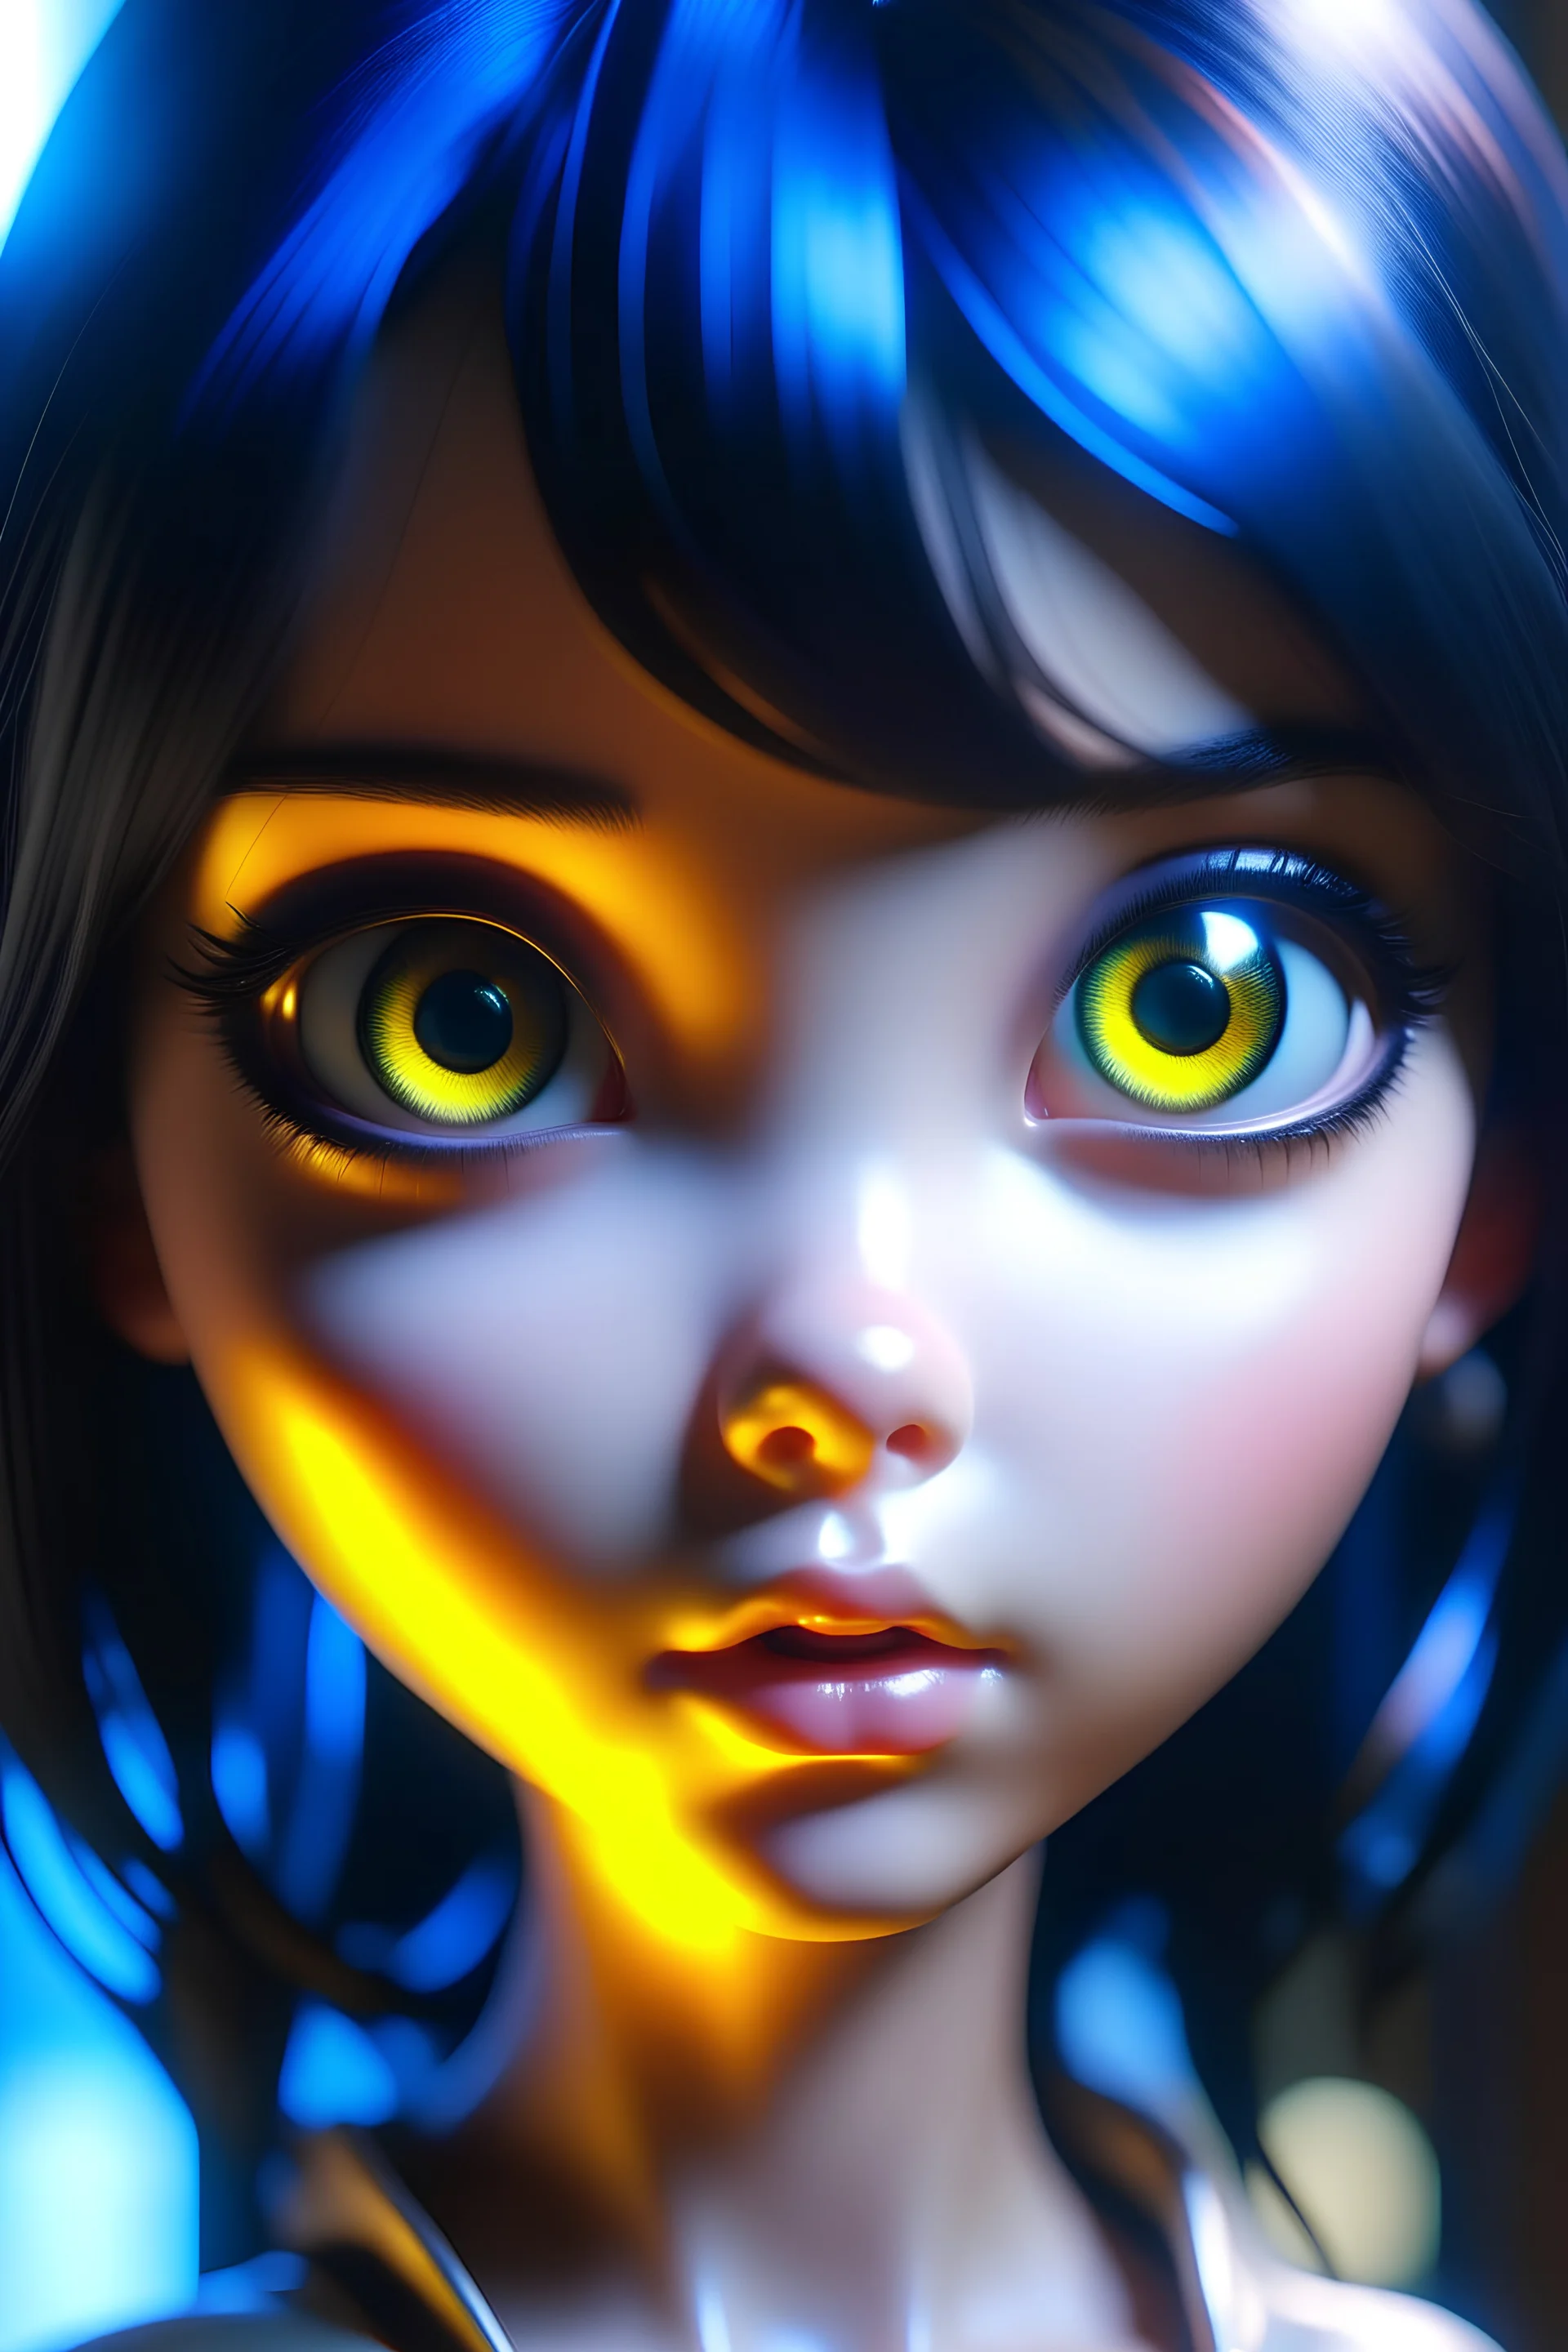 realistic portrait of an anime waifu robot doll, light eye color, very big Alita-like doll eyes, and youthful looking silicone skin